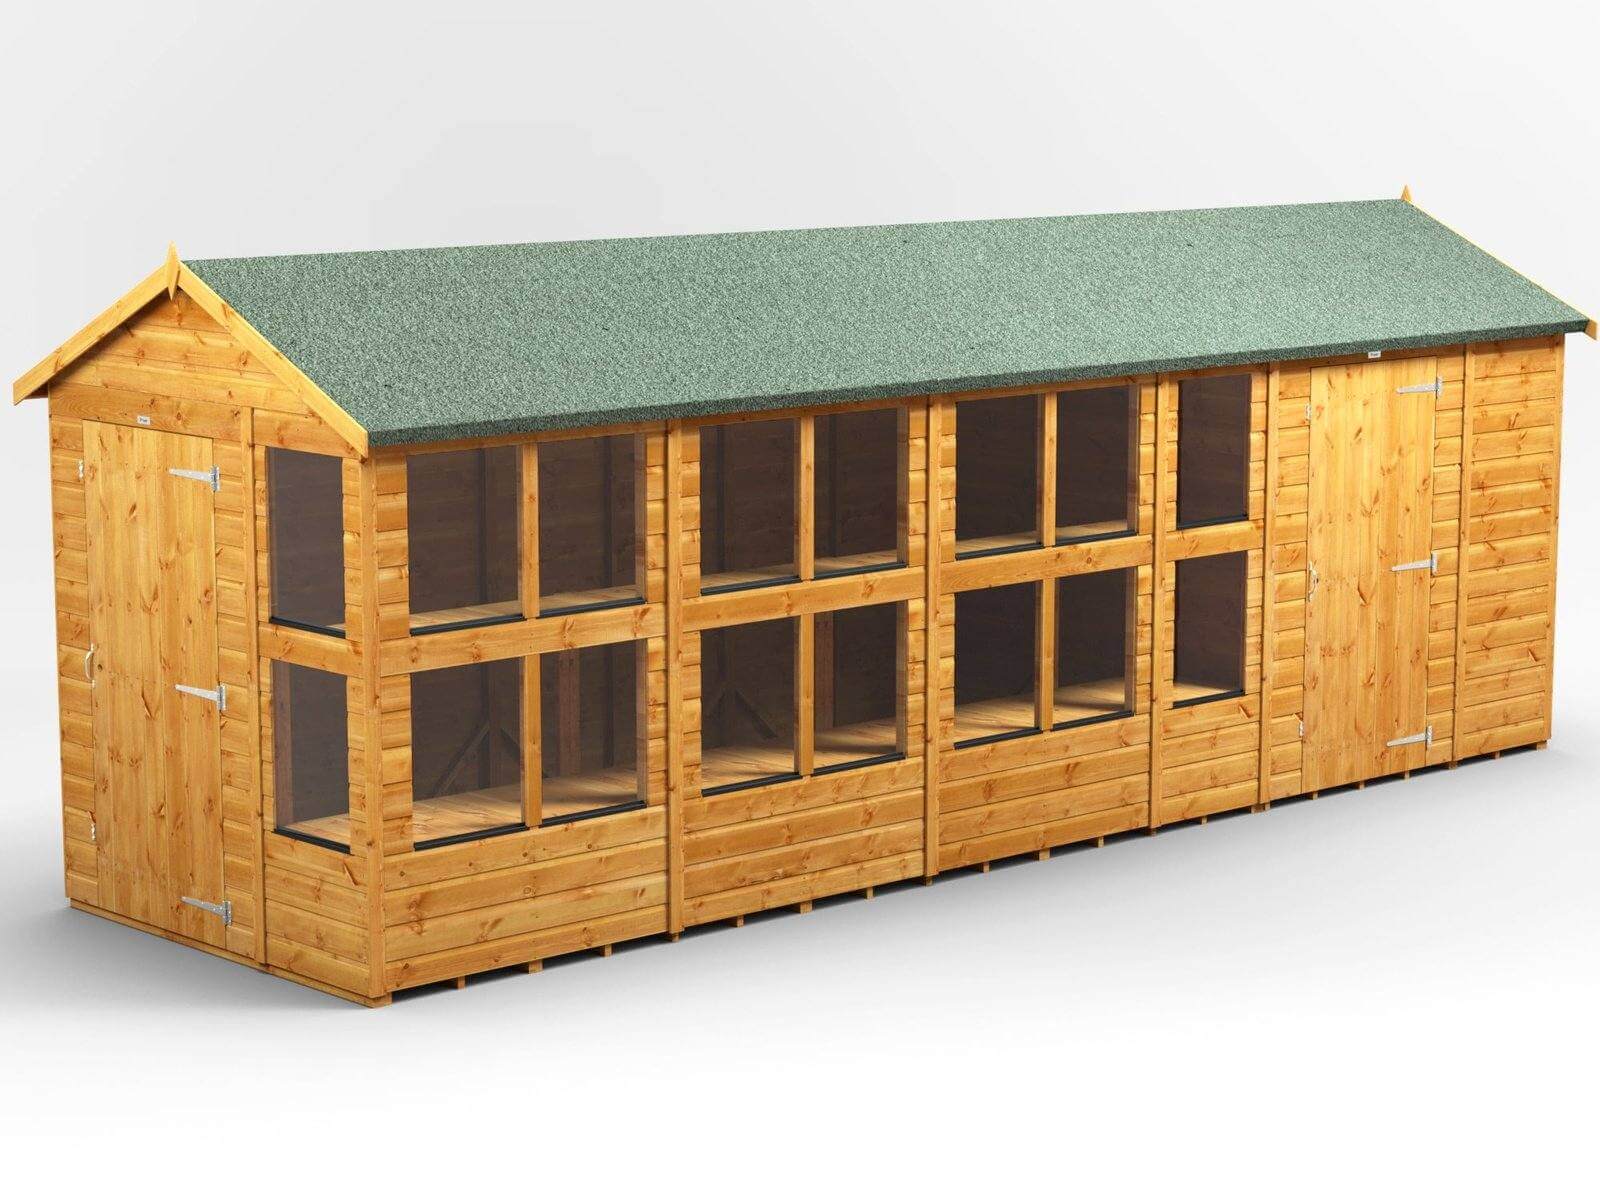 Power Apex Wooden Potting Shed Combi Various Sizes Shed Sizes: 20x6 (includes 6ft Side Store)